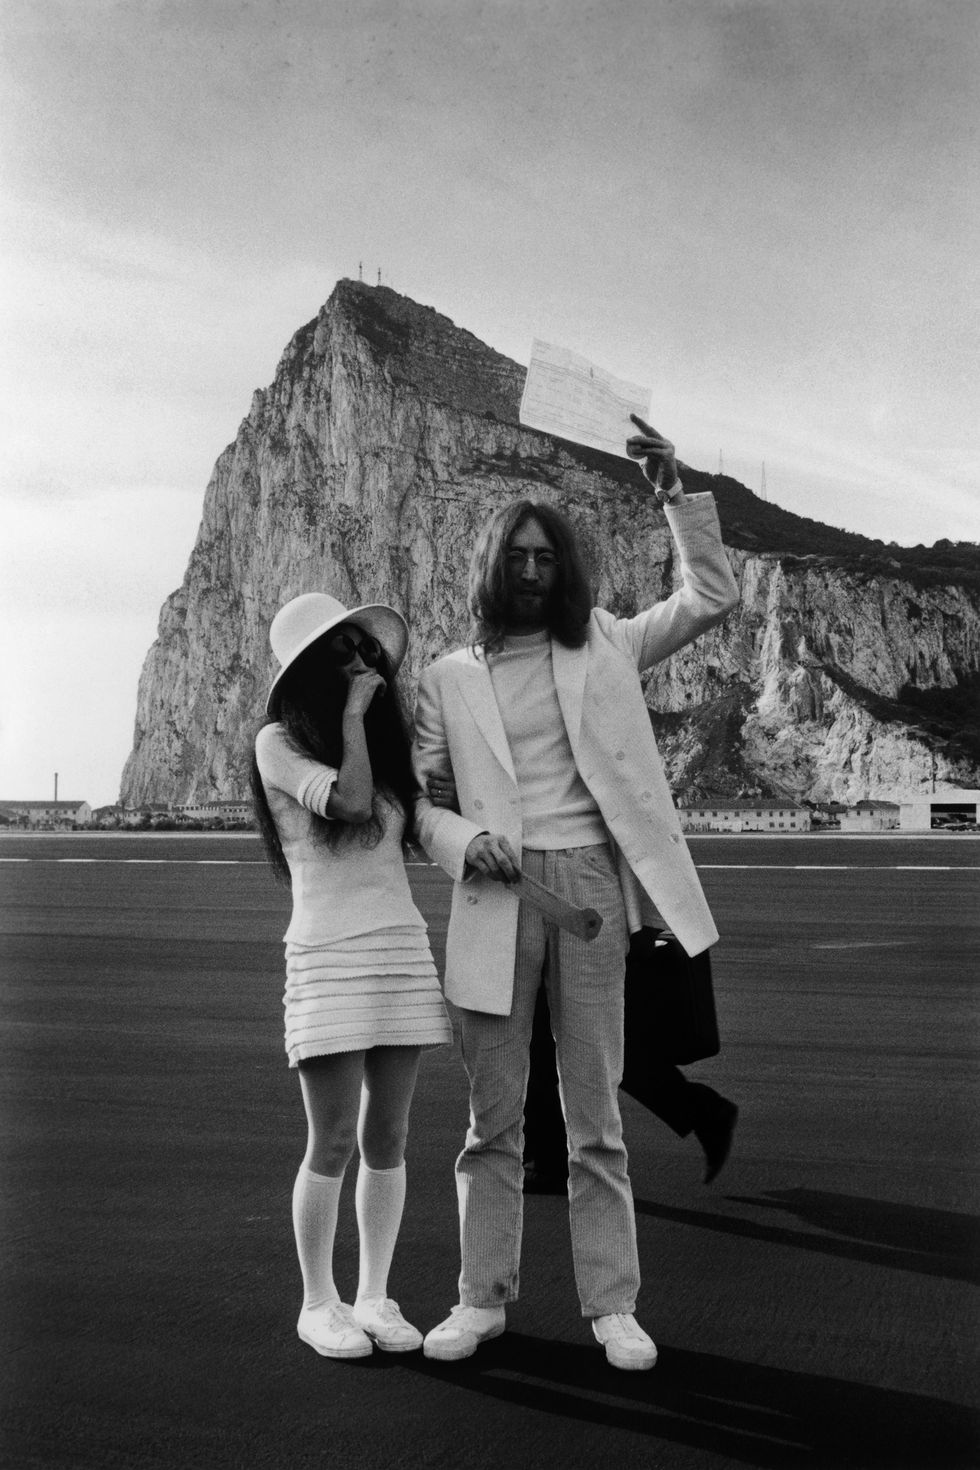 John Lennon and Yoko Ono, both dressed in white, with their marriage certificate after their wedding in Gibraltar, 20th March 1969. (Photo by Simpson/Express/Getty Images)